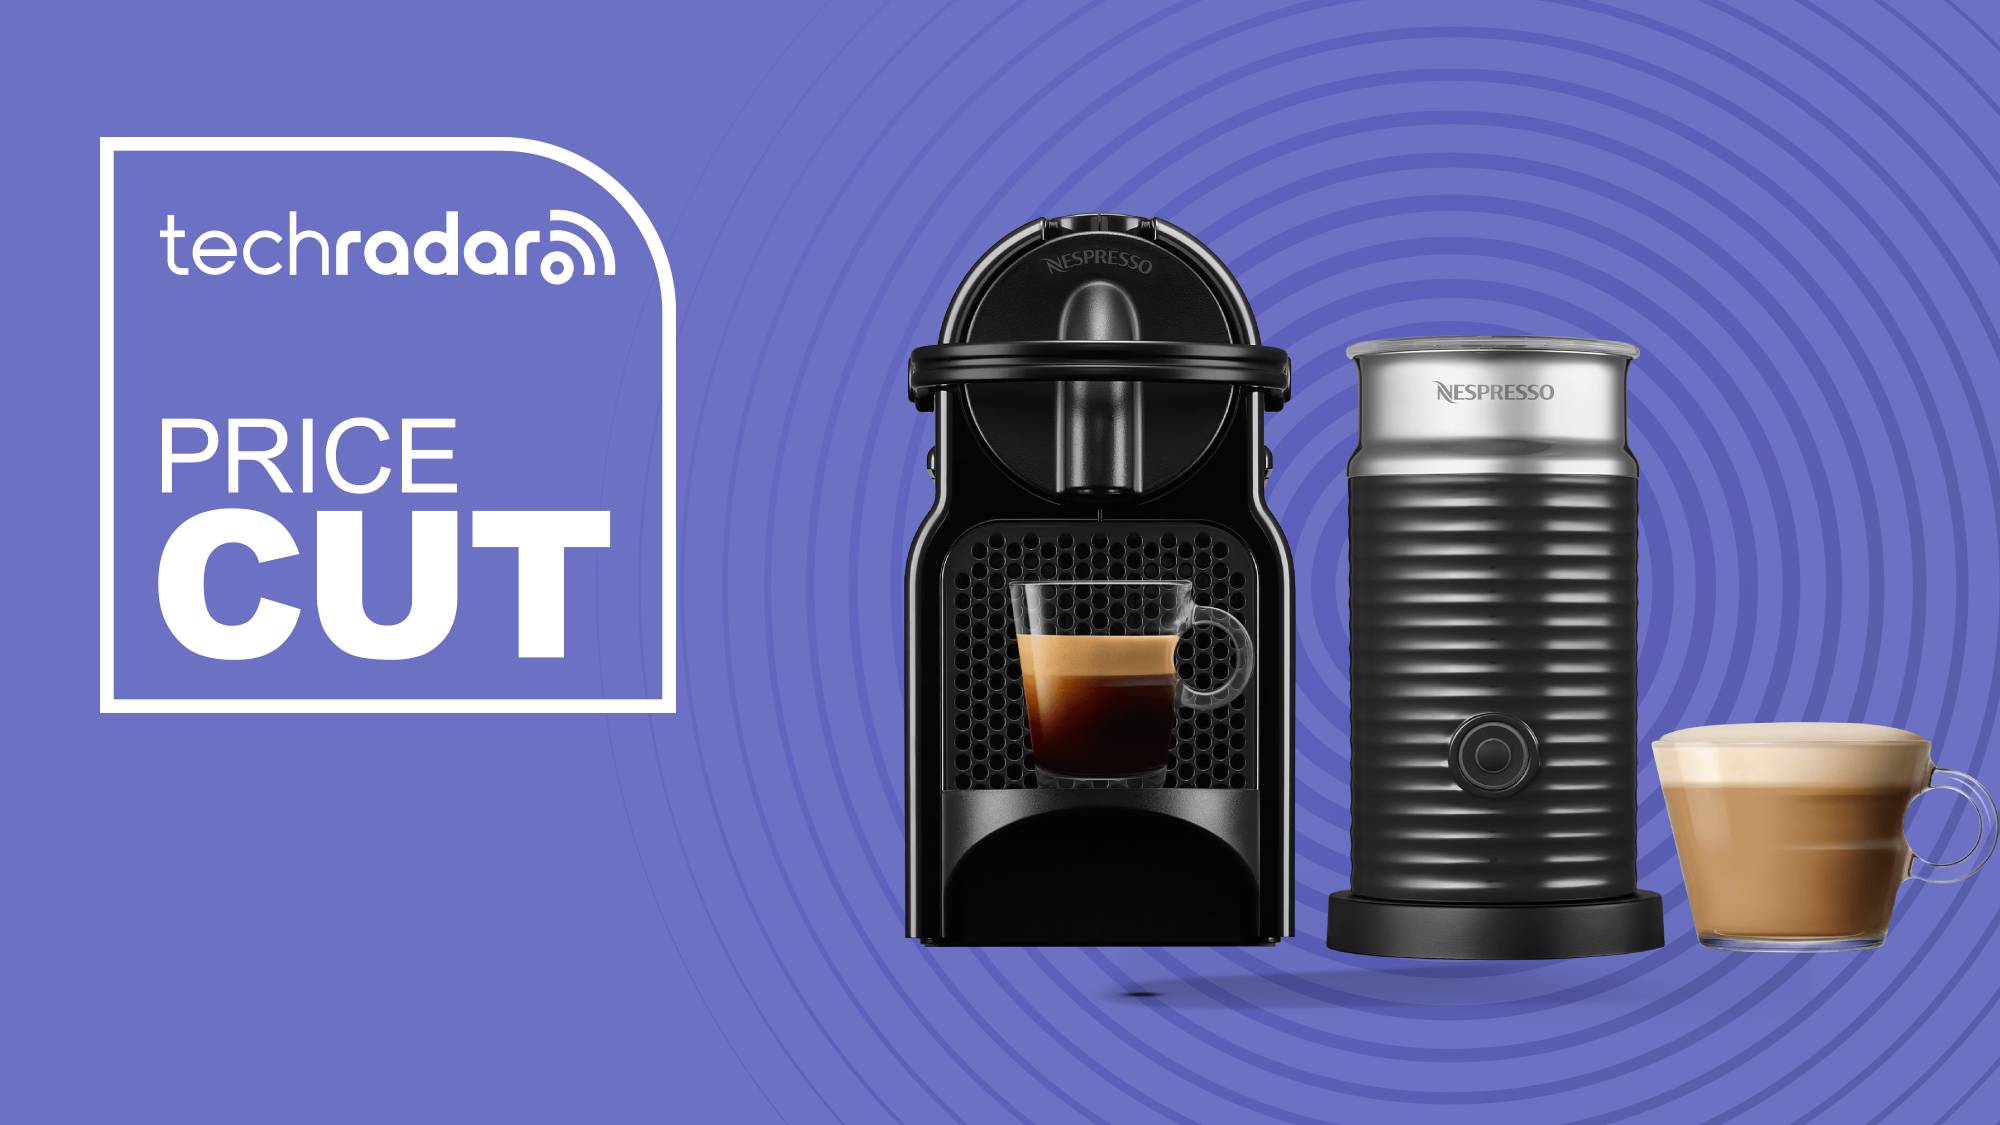 I love this Ninja coffee maker and it just crashed to $69